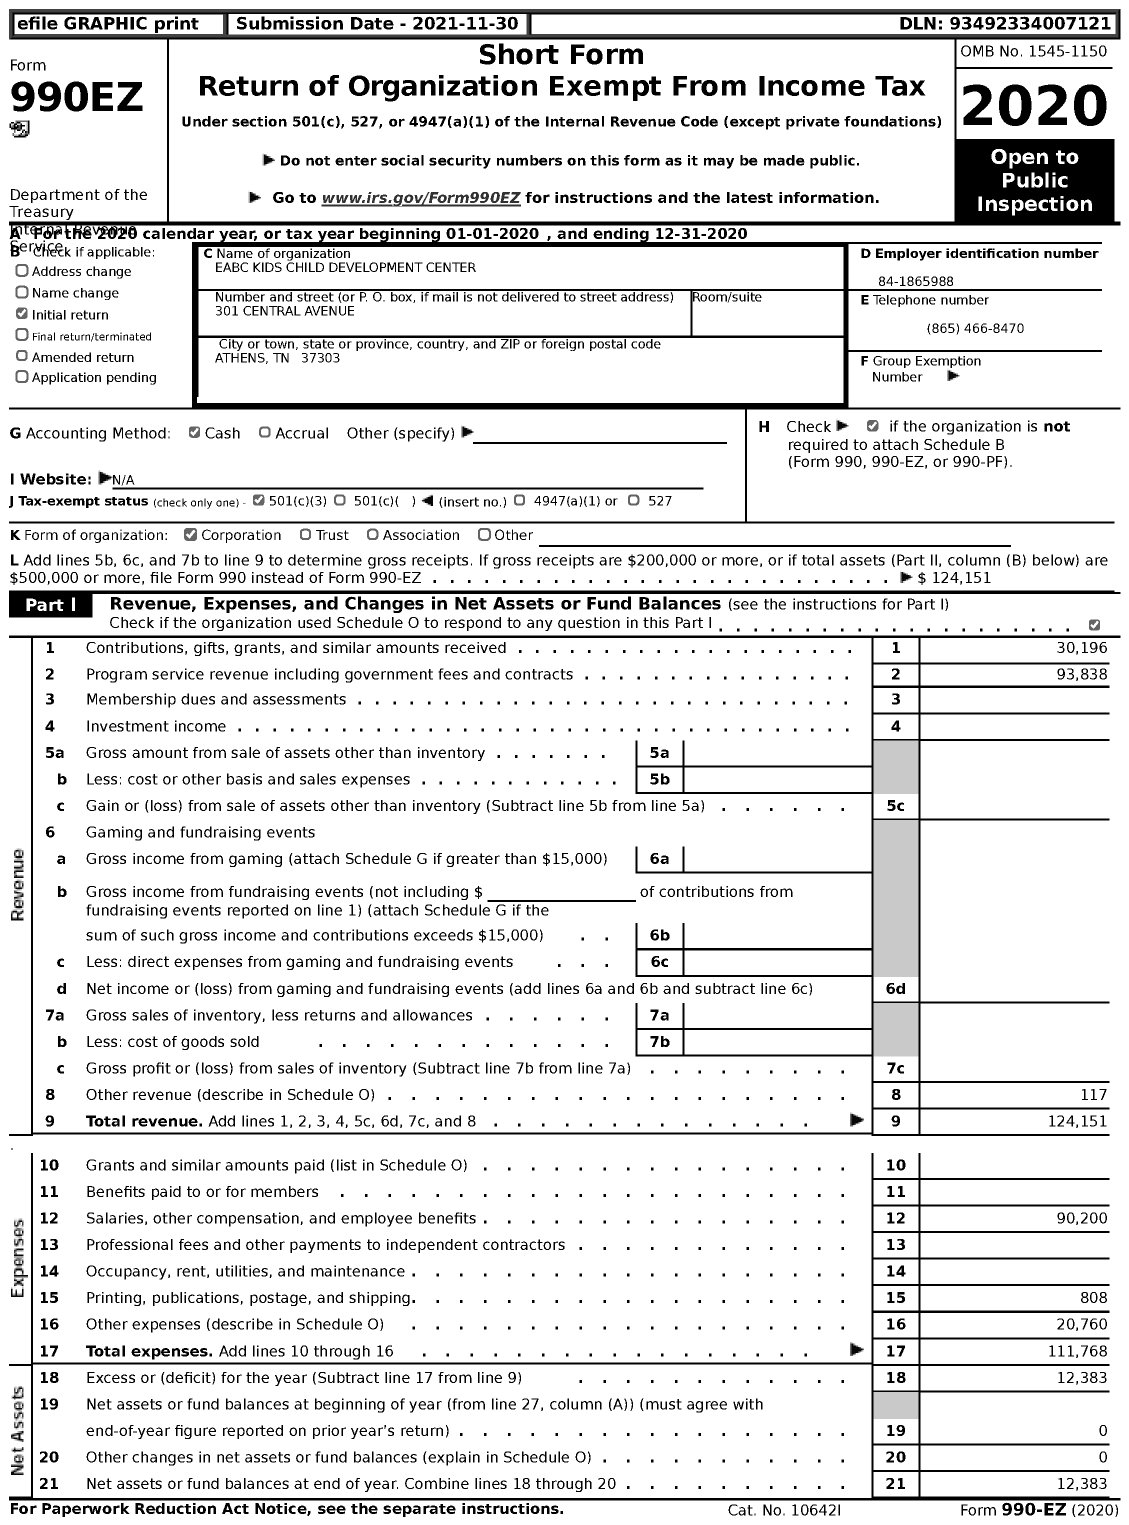 Image of first page of 2020 Form 990EZ for Eabc Kids Child Development Center